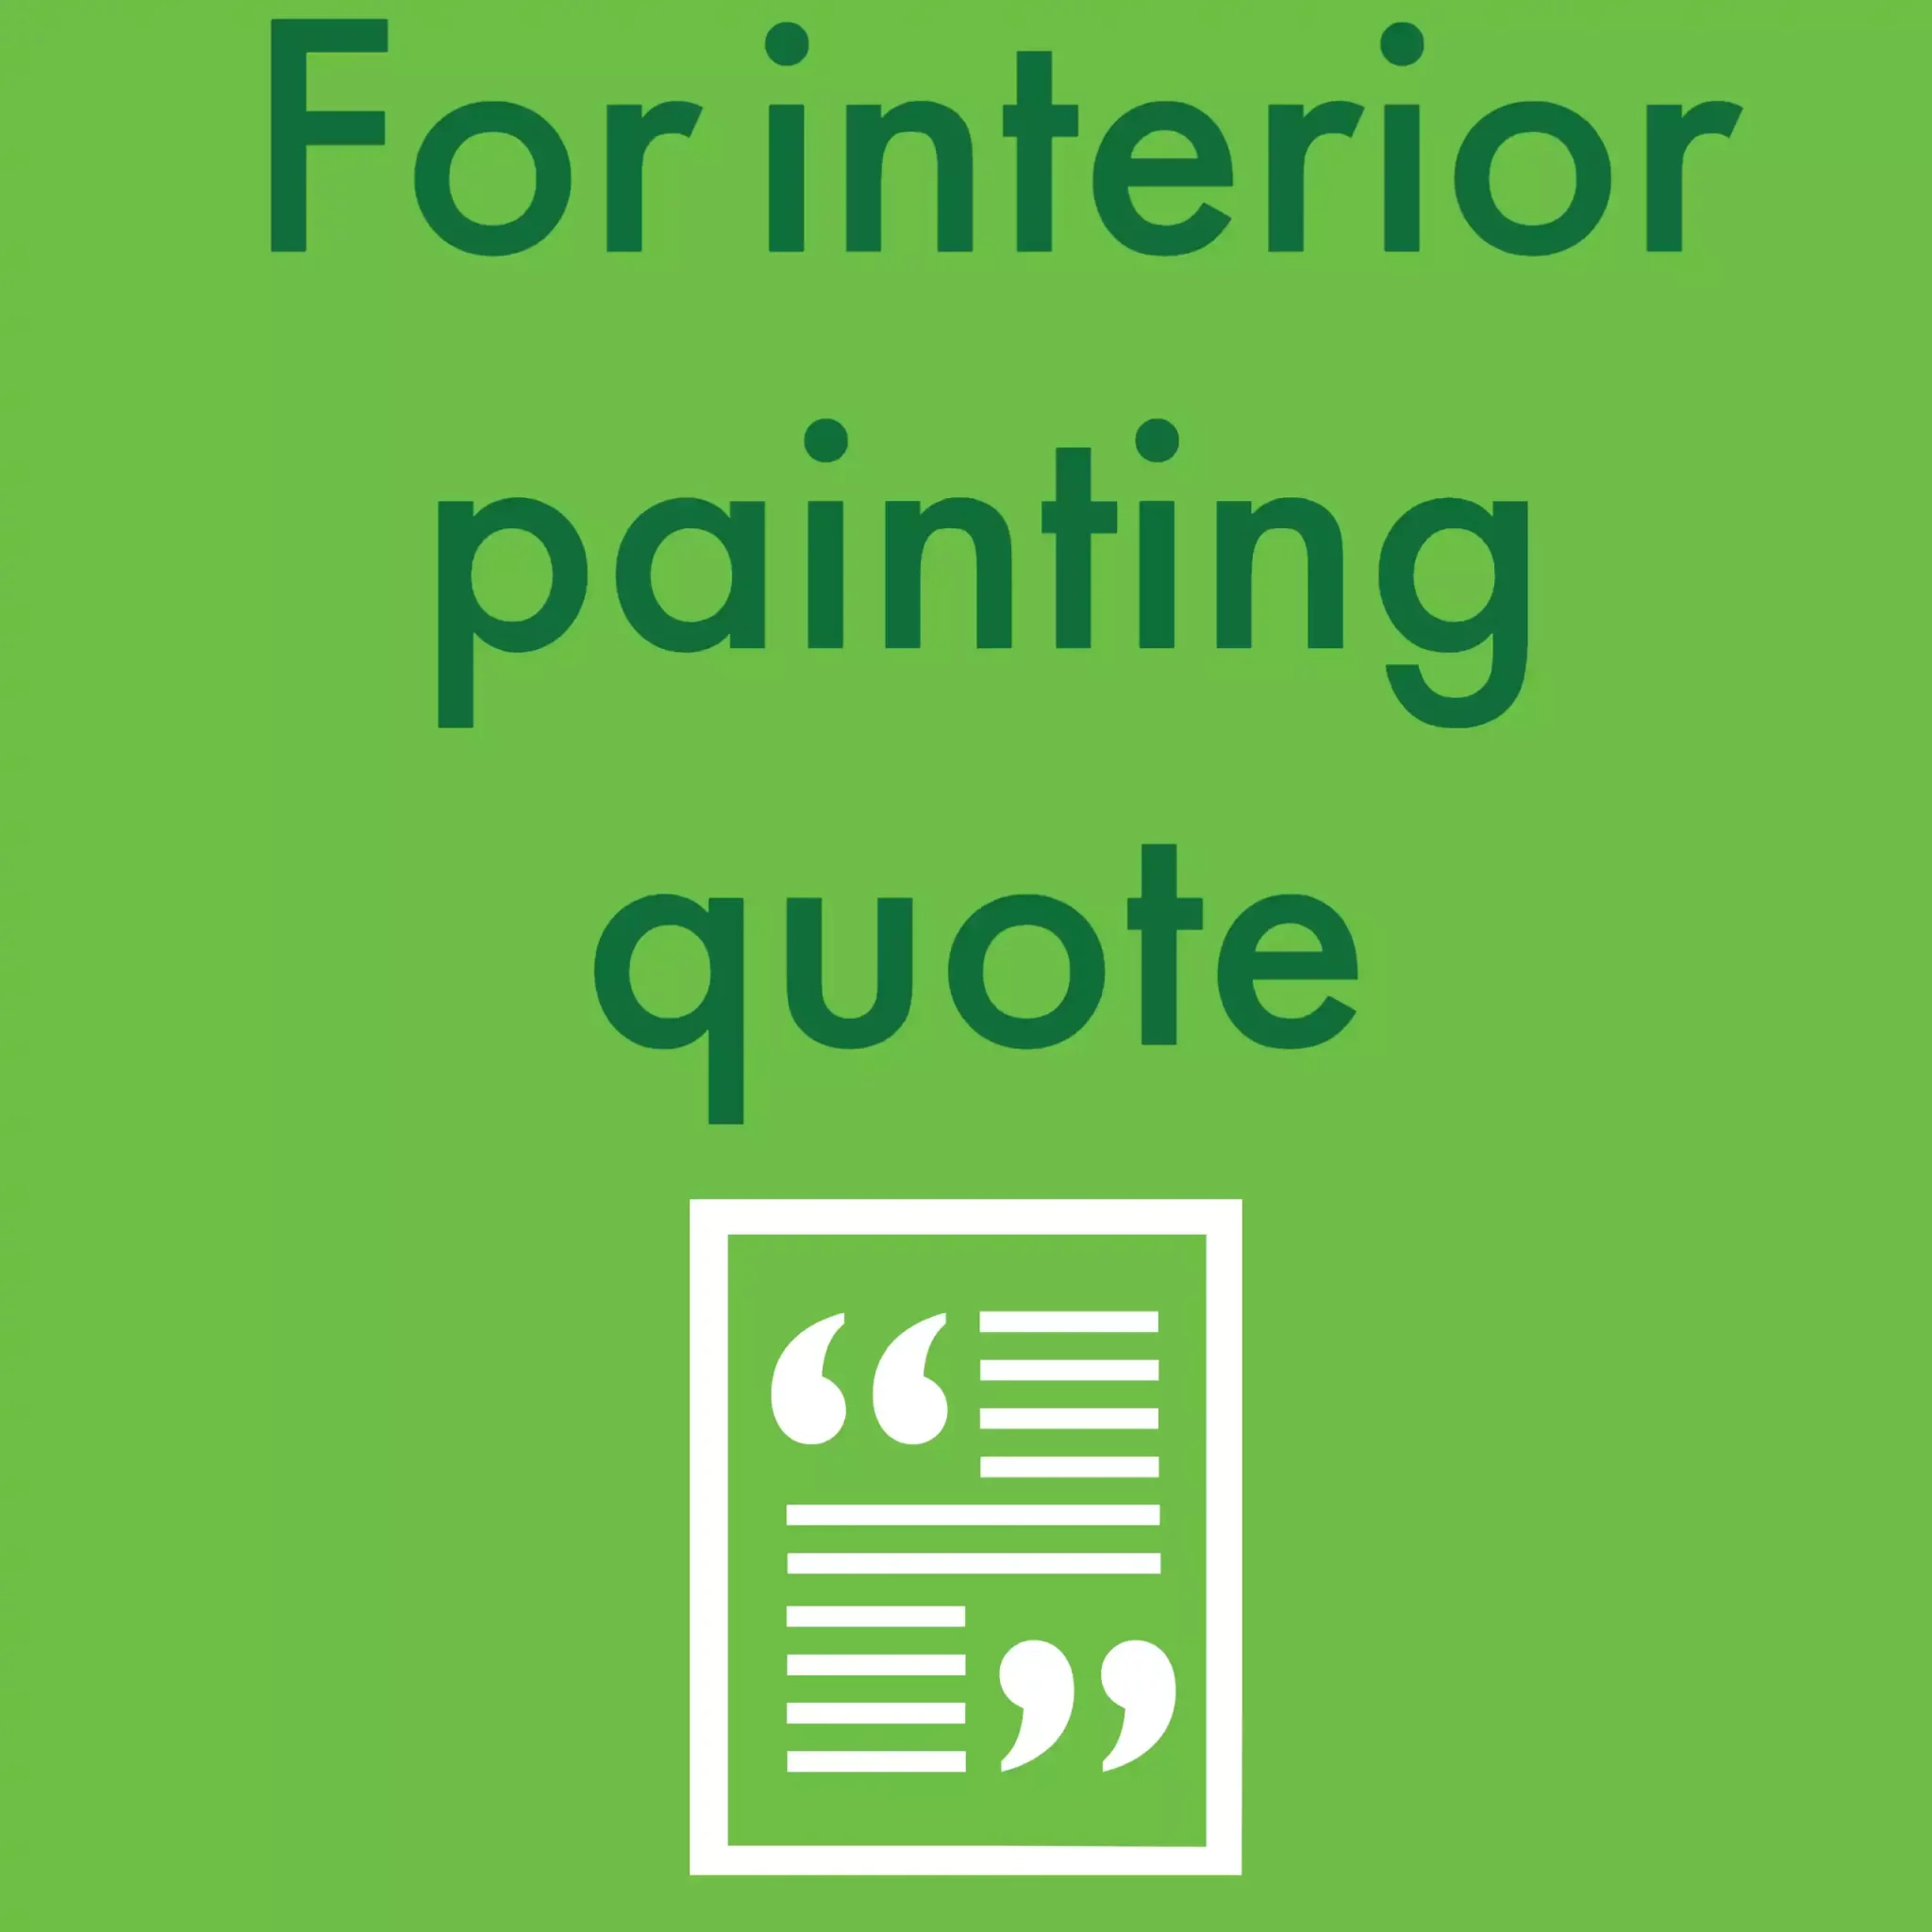 For interior painting quote